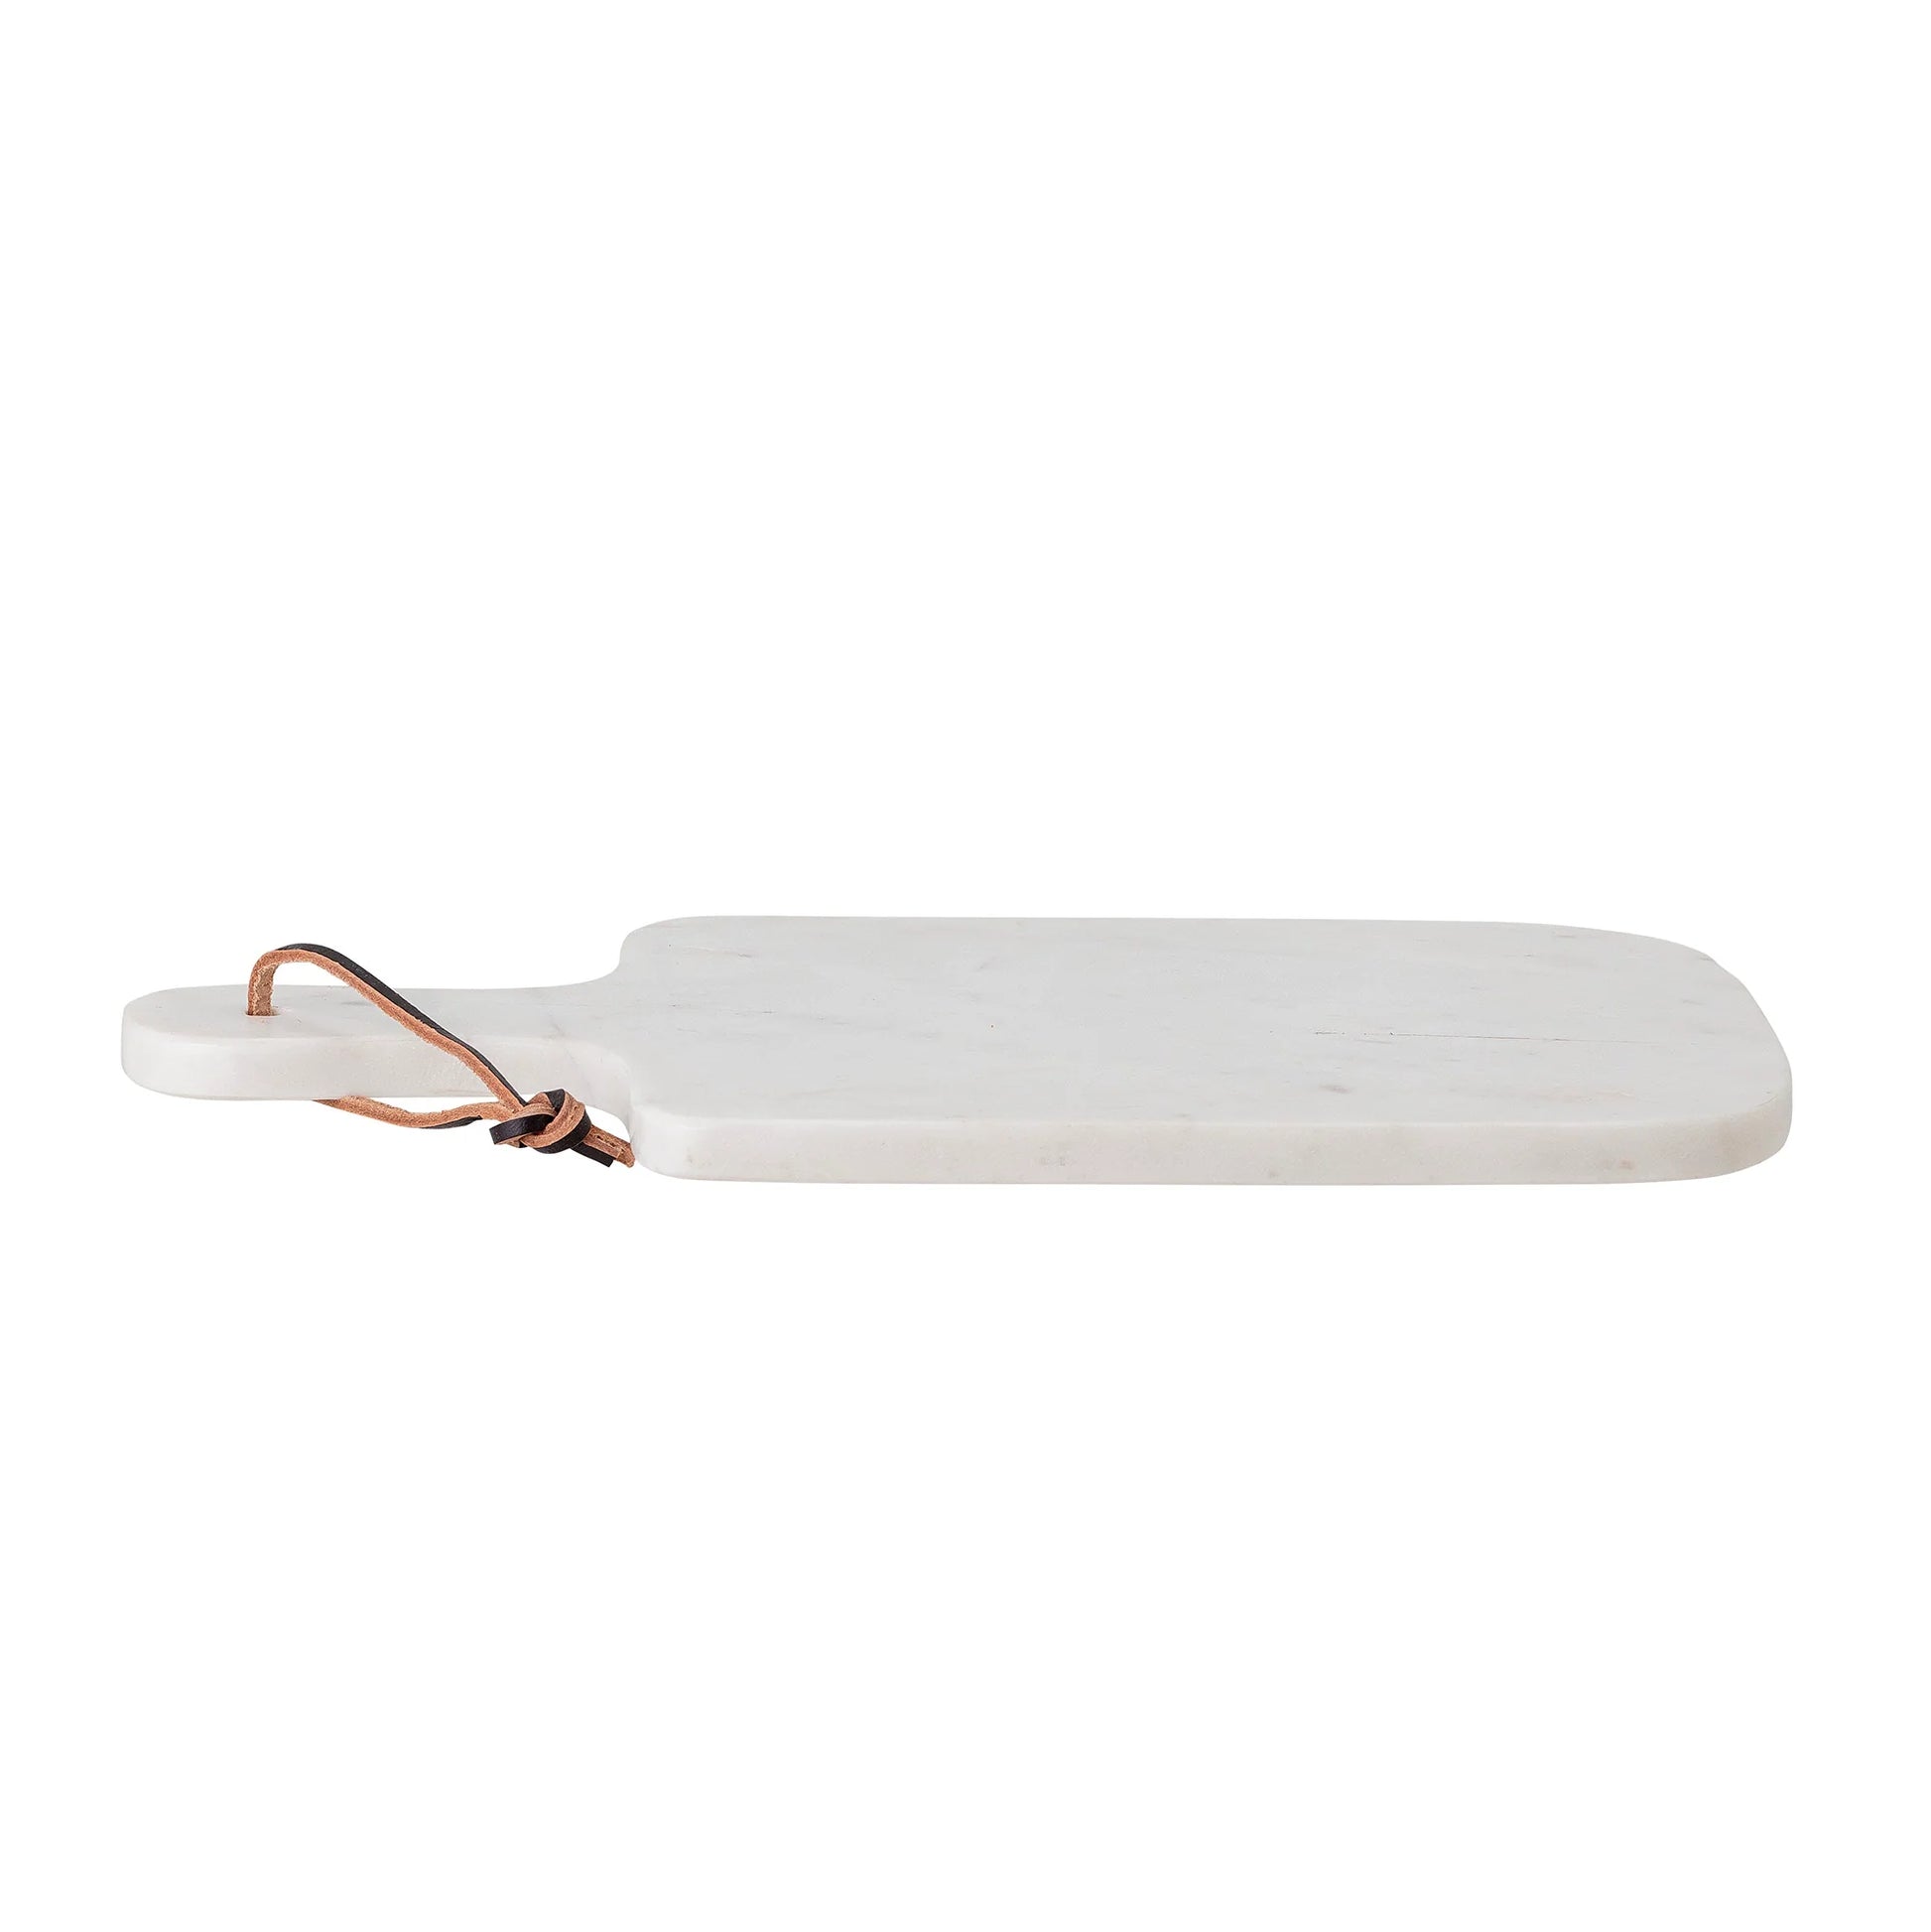 The Gurly Cutting Board Marble by Bloomingville features a classic white marble board with a chic leather string attached to its handle